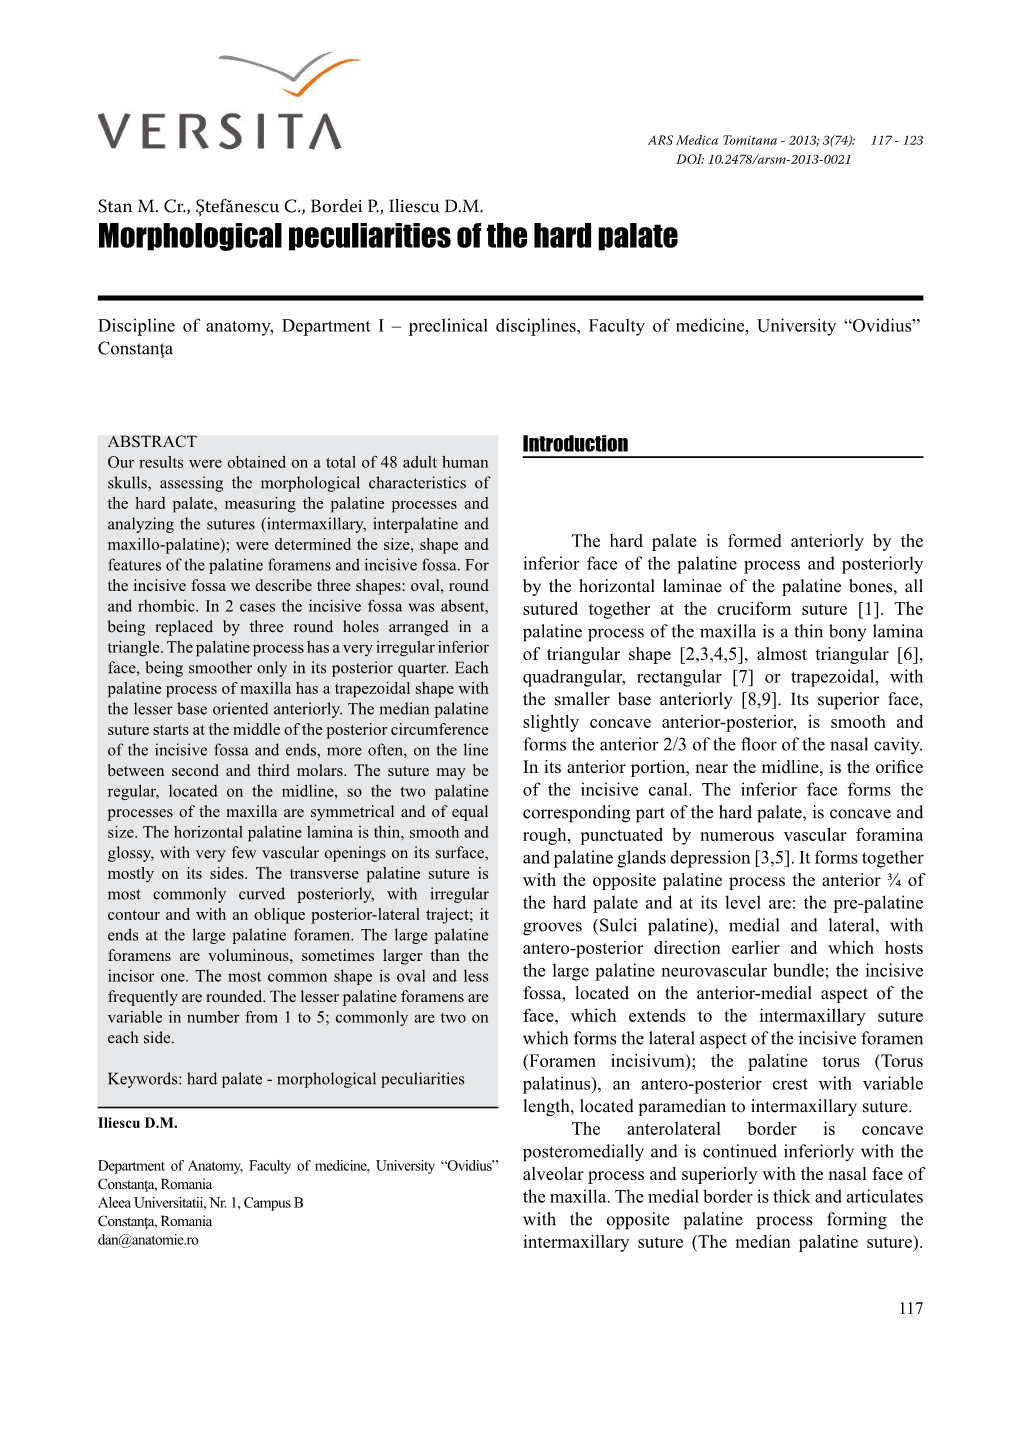 Morphological Peculiarities of the Hard Palate